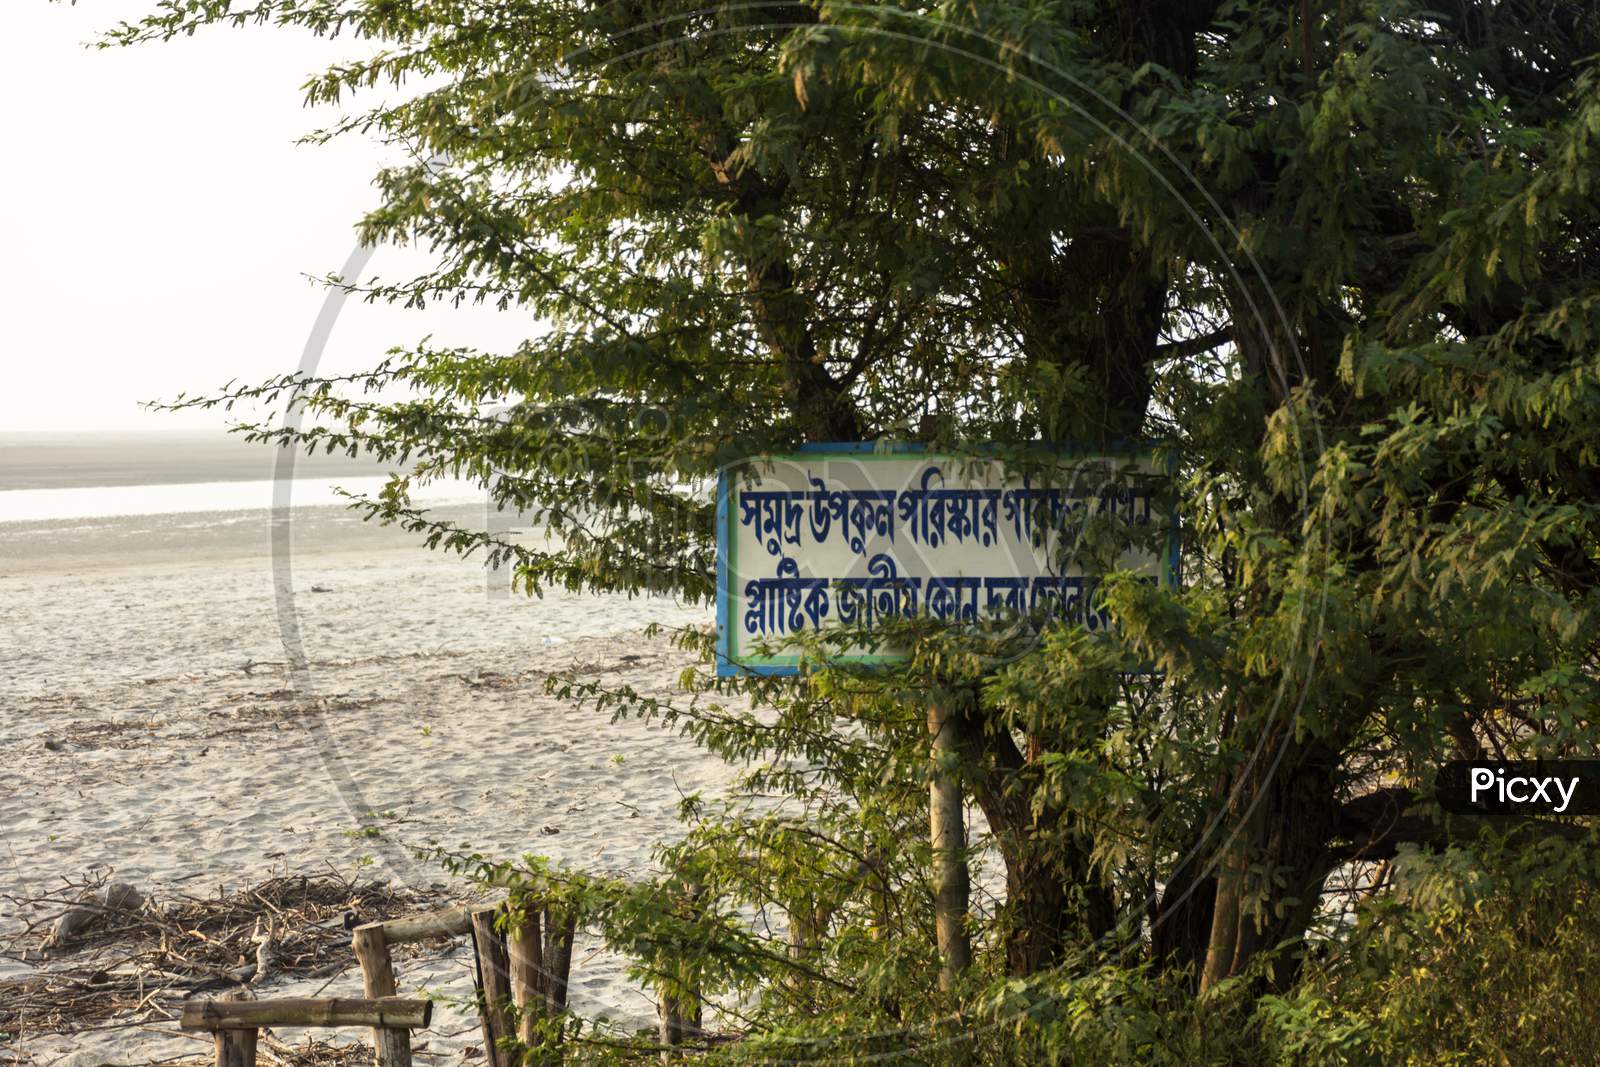 A Sign Board Of Caution "Please Keep The Sea Beach Clean And Don'T Throw Plastic Items" At "Henry Island" Near Bakkhali, 24 Parganas, India